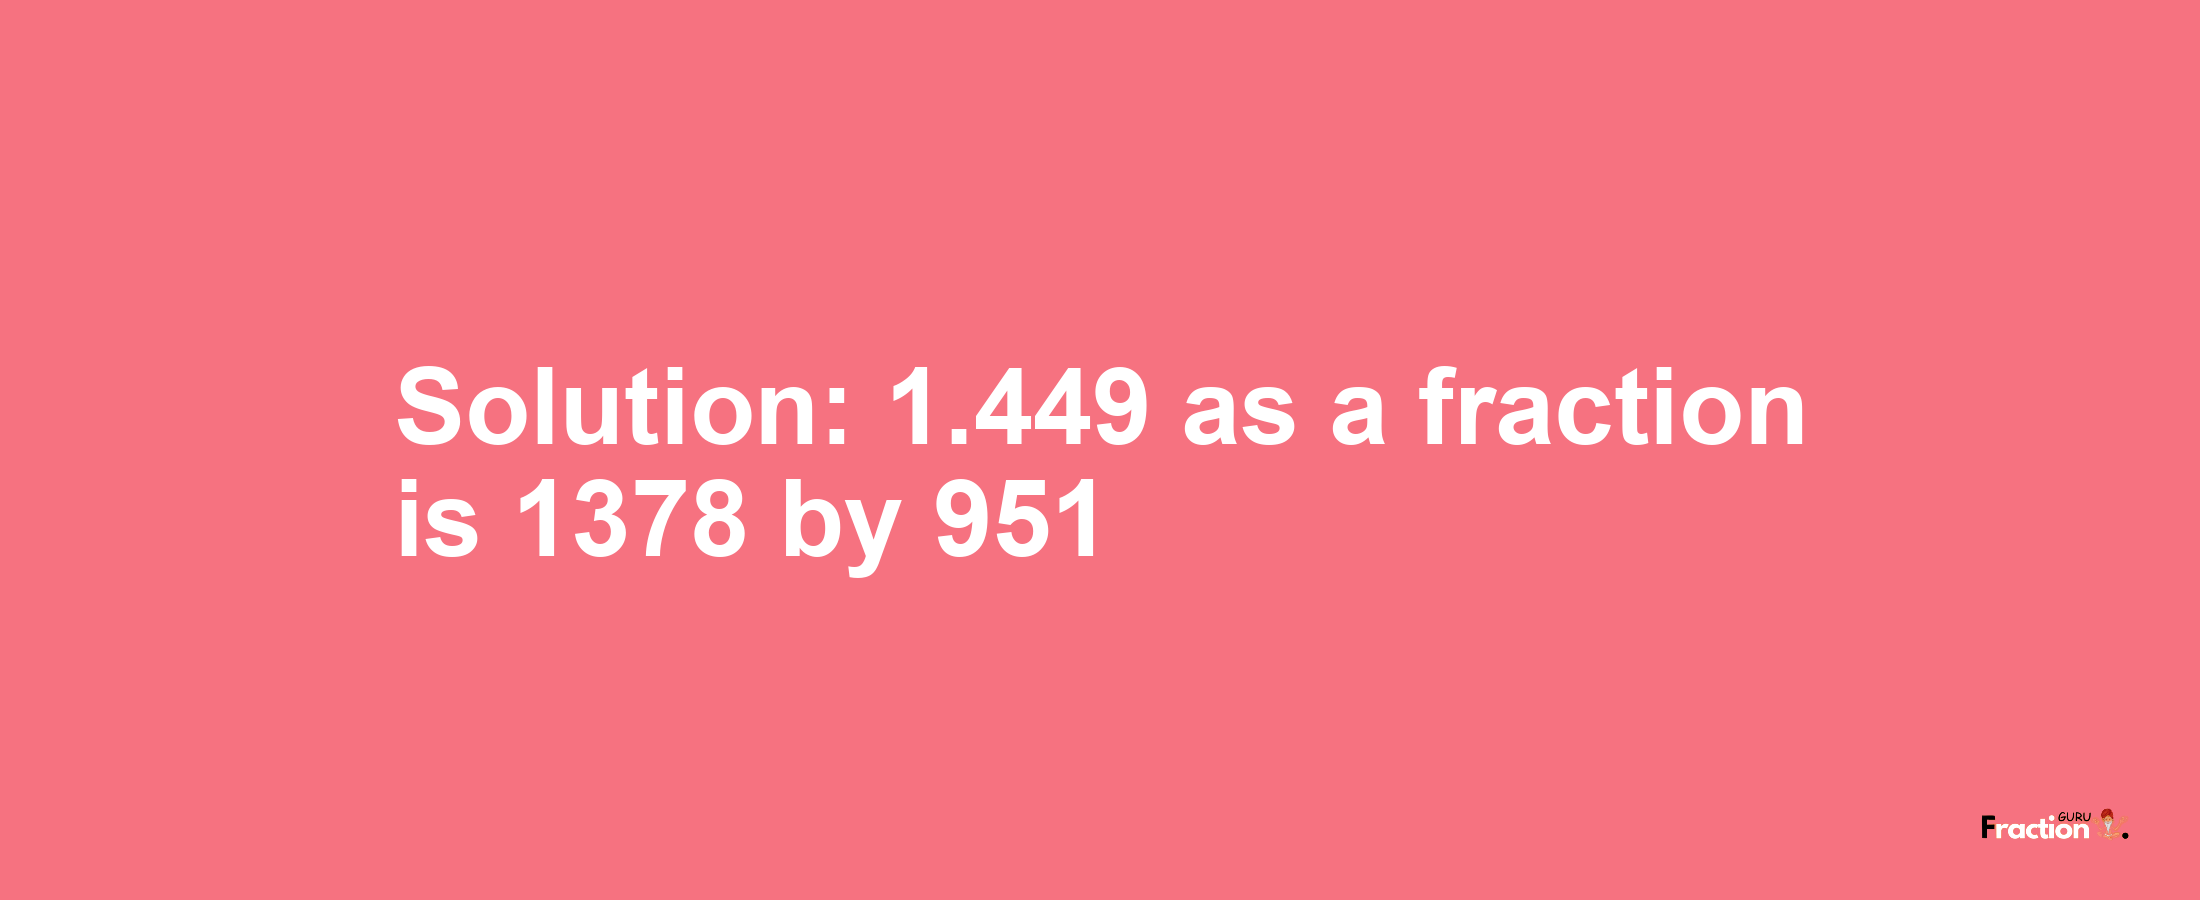 Solution:1.449 as a fraction is 1378/951